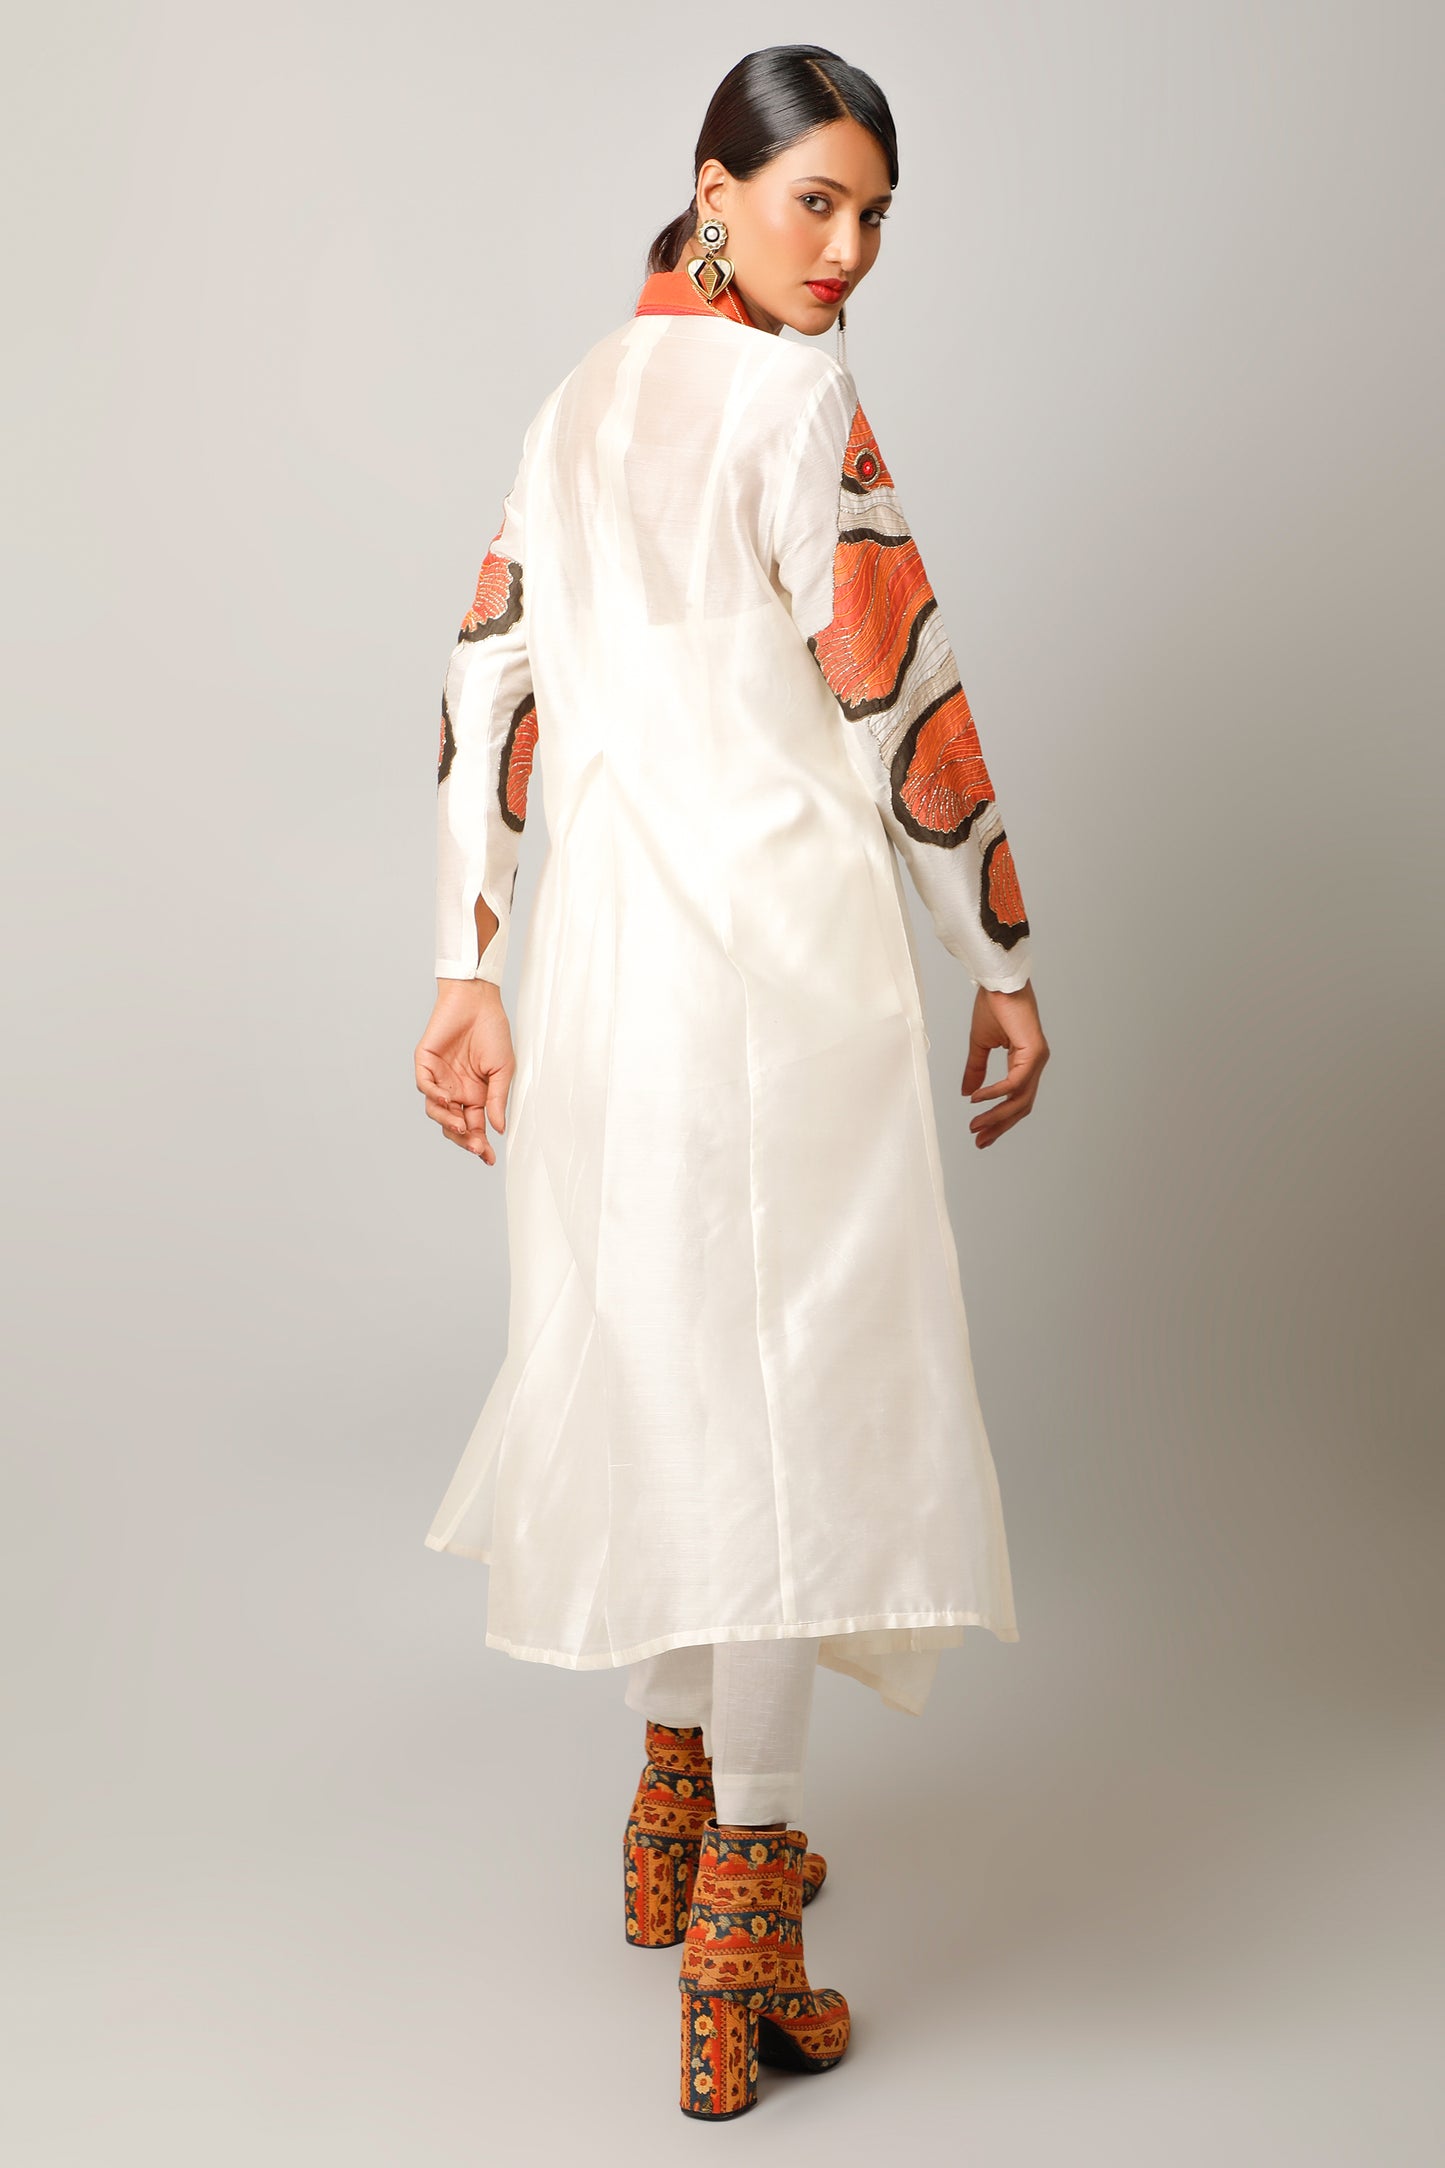 Draped Shirts With Fish Detail On The Sleeves + Inner Slip + Pants - Ivory